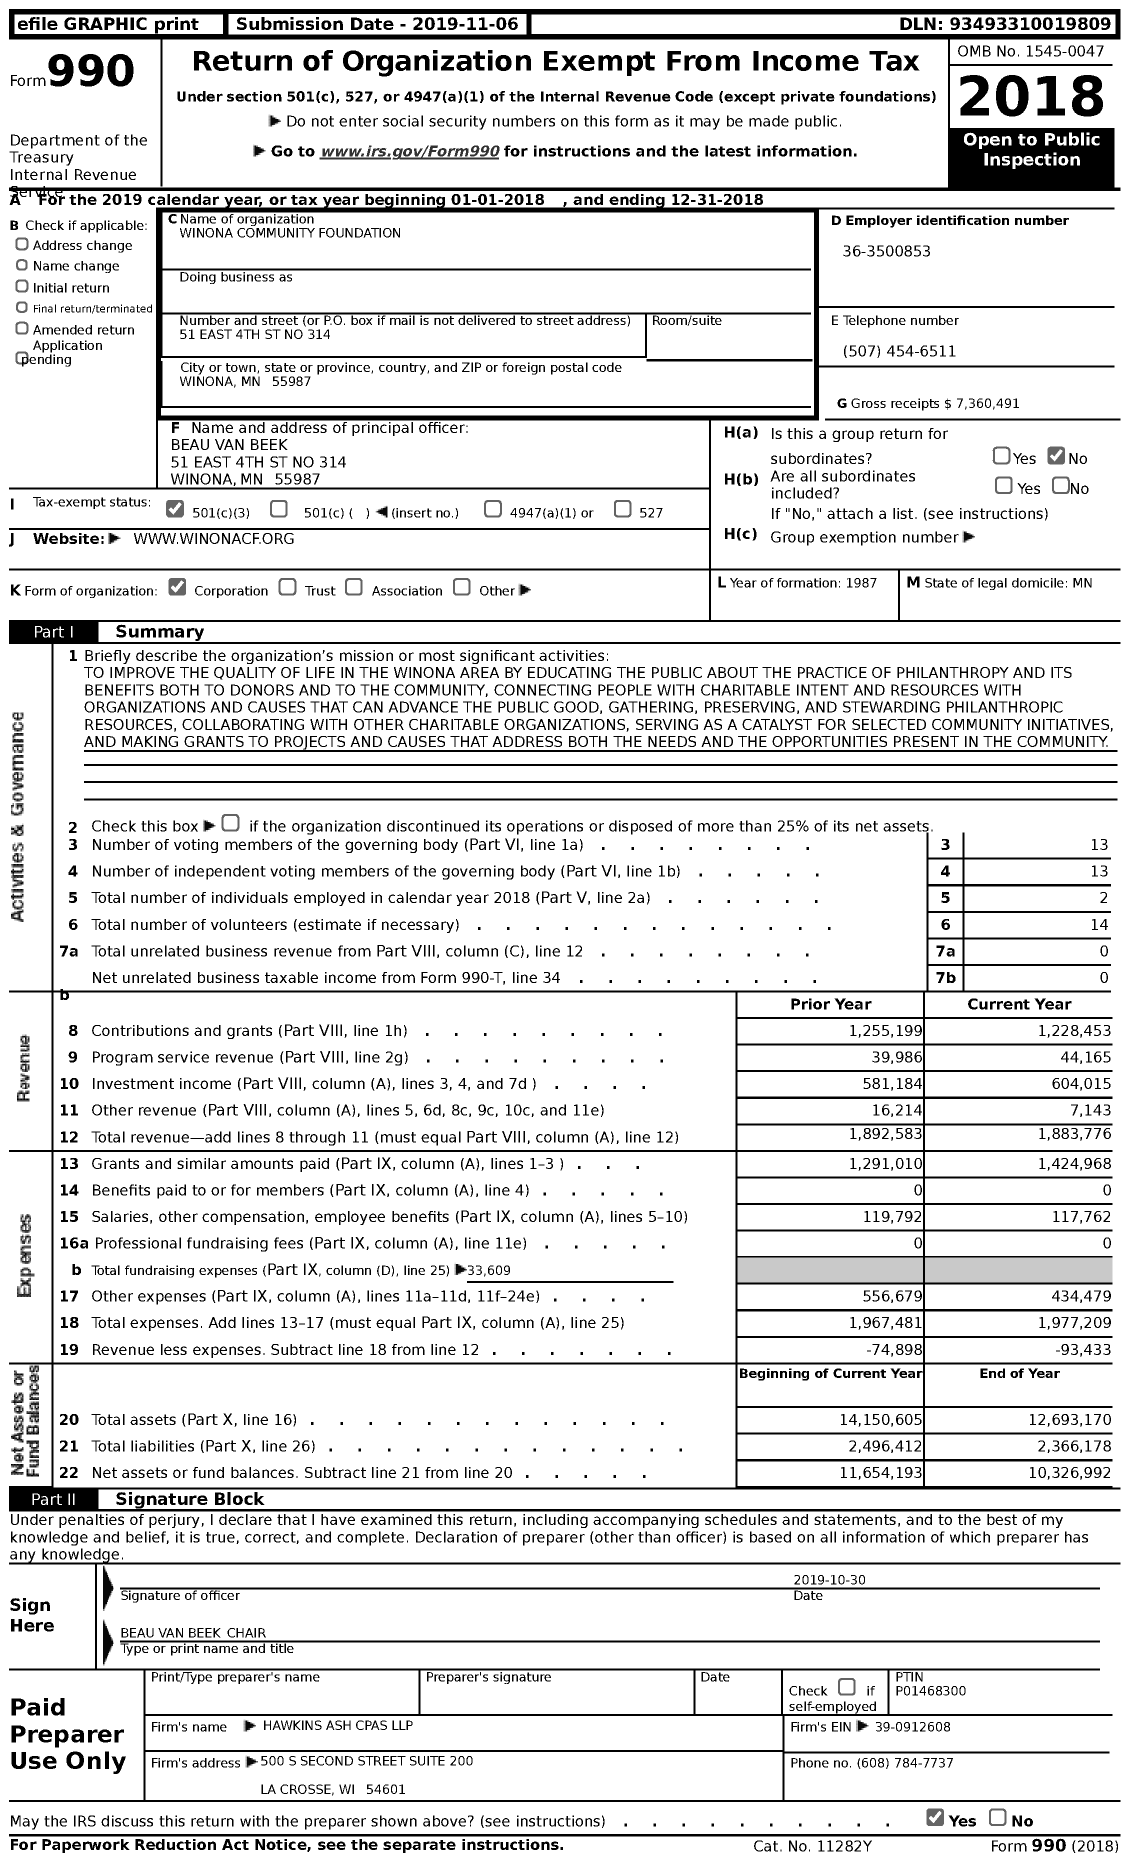 Image of first page of 2018 Form 990 for Winona Community Foundation (WCF)